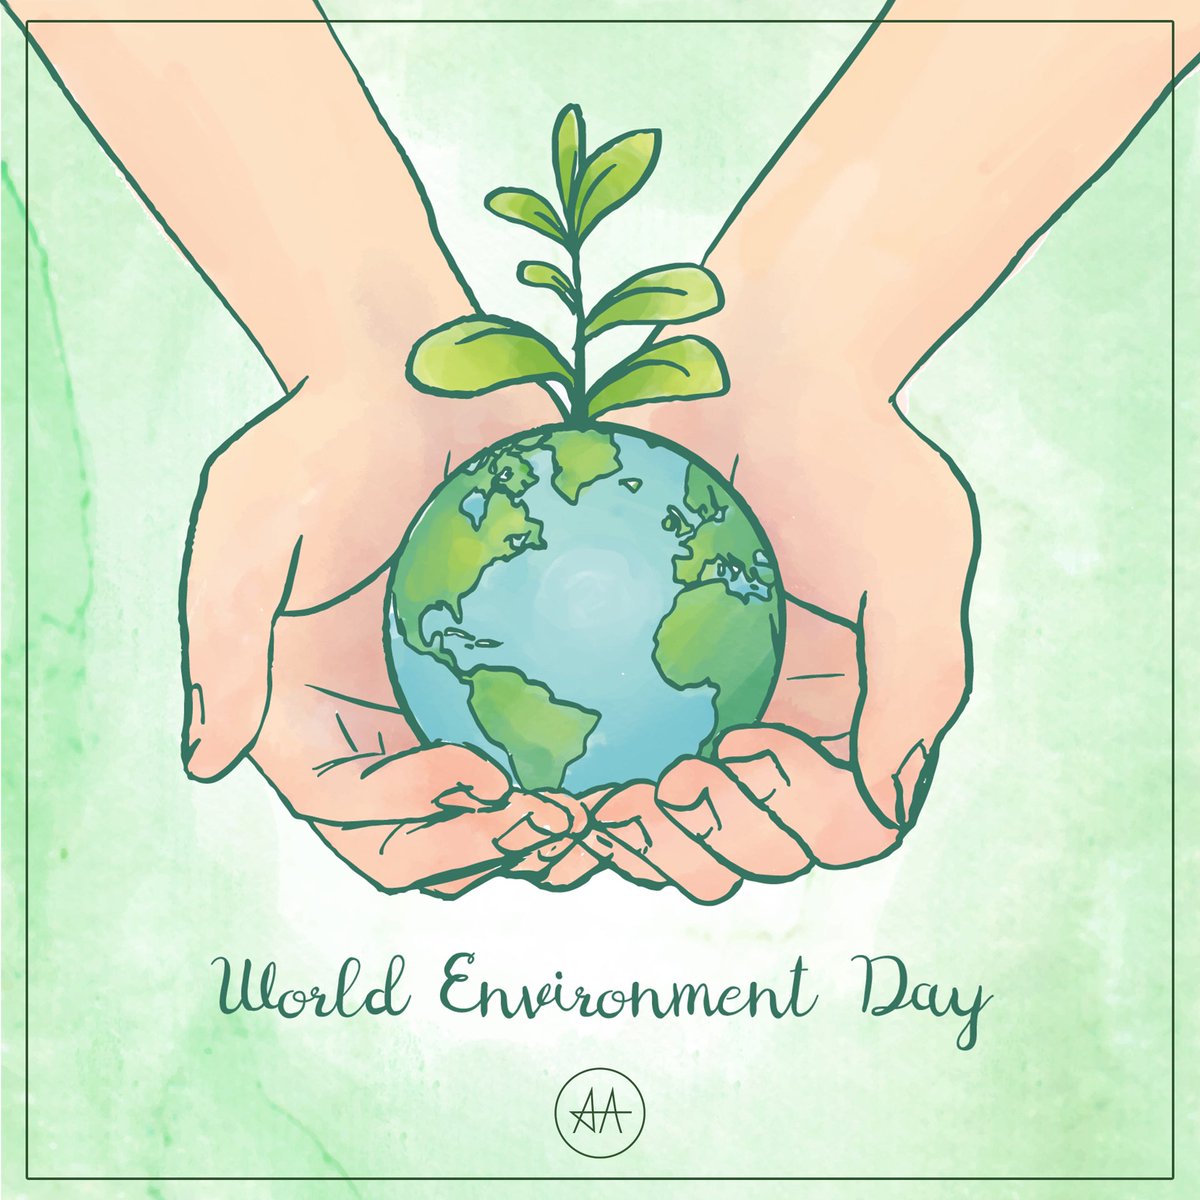 On #WorldEnvironmentDay , let us work towards a greener planet. Each of our contribution matters.